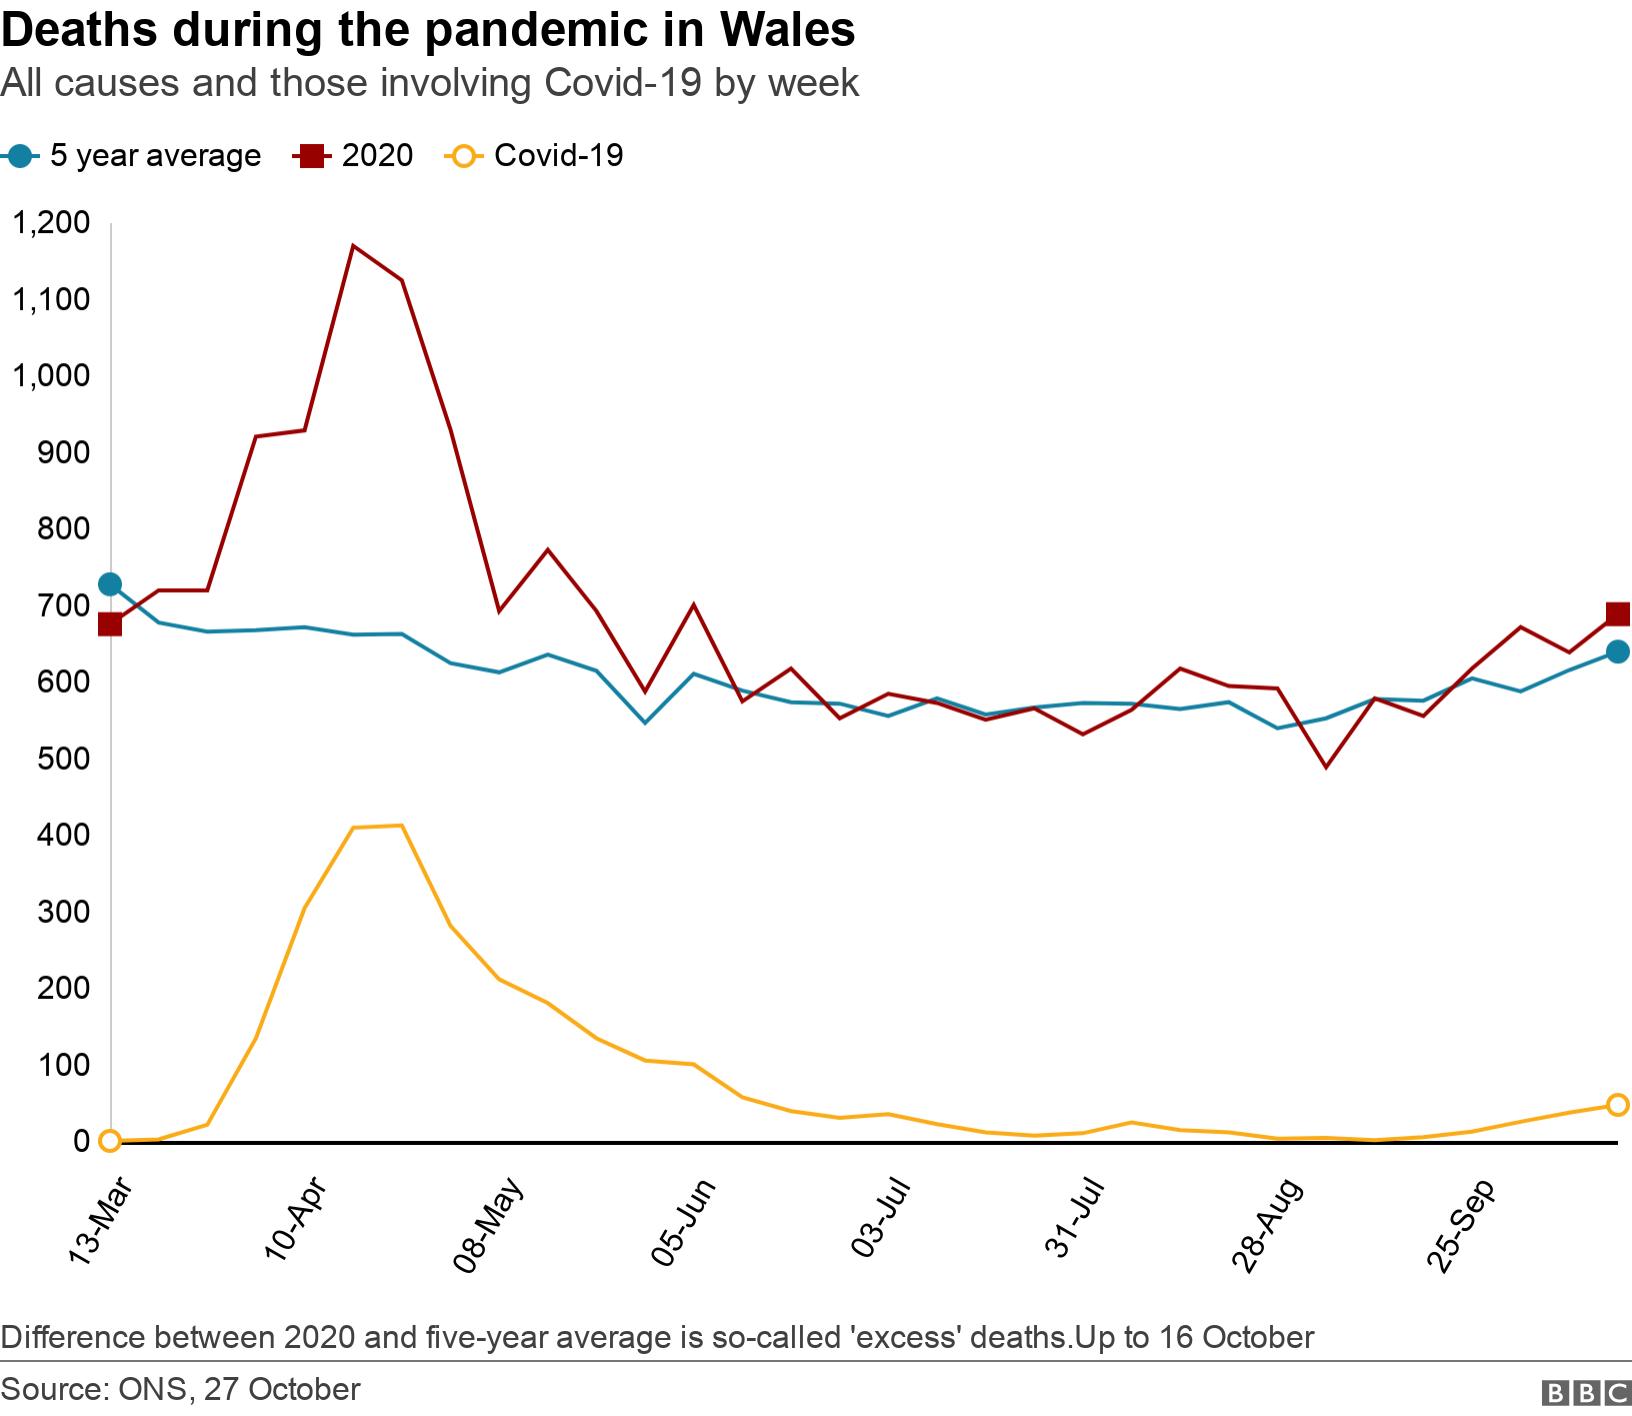 Deaths during the pandemic in Wales. All causes and those involving Covid-19 by week. Difference between 2020 and five-year average is so-called &#39;excess&#39; deaths.Up to 16 October.